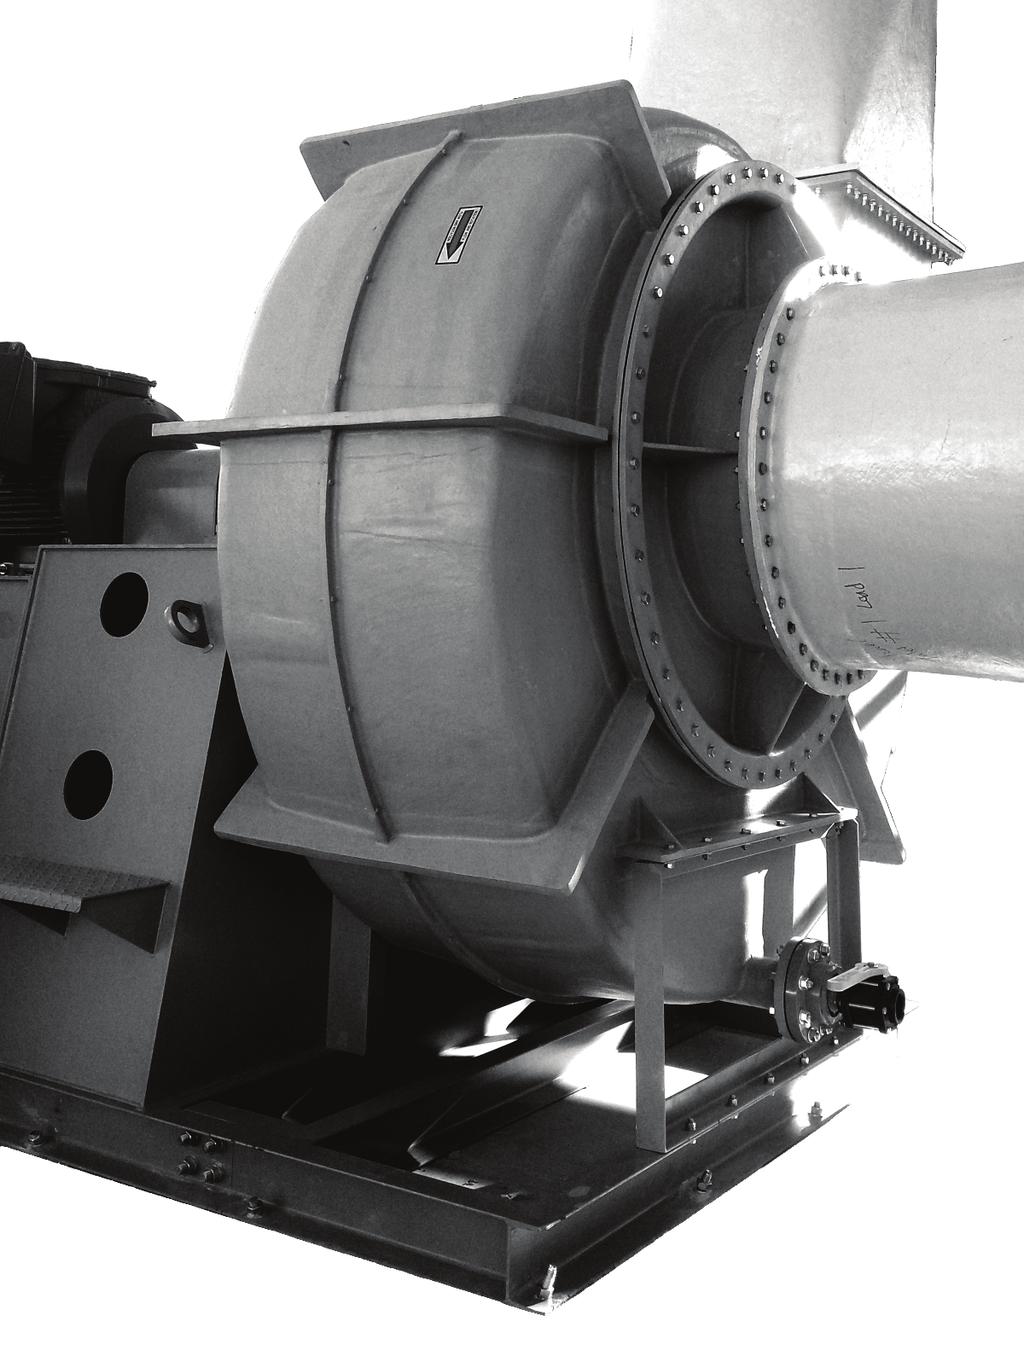 Optional Construction Graphite Impregnation Graphite impregnation is available for spark resistant construction. The gas-stream surfaces are grounded to the fan base.